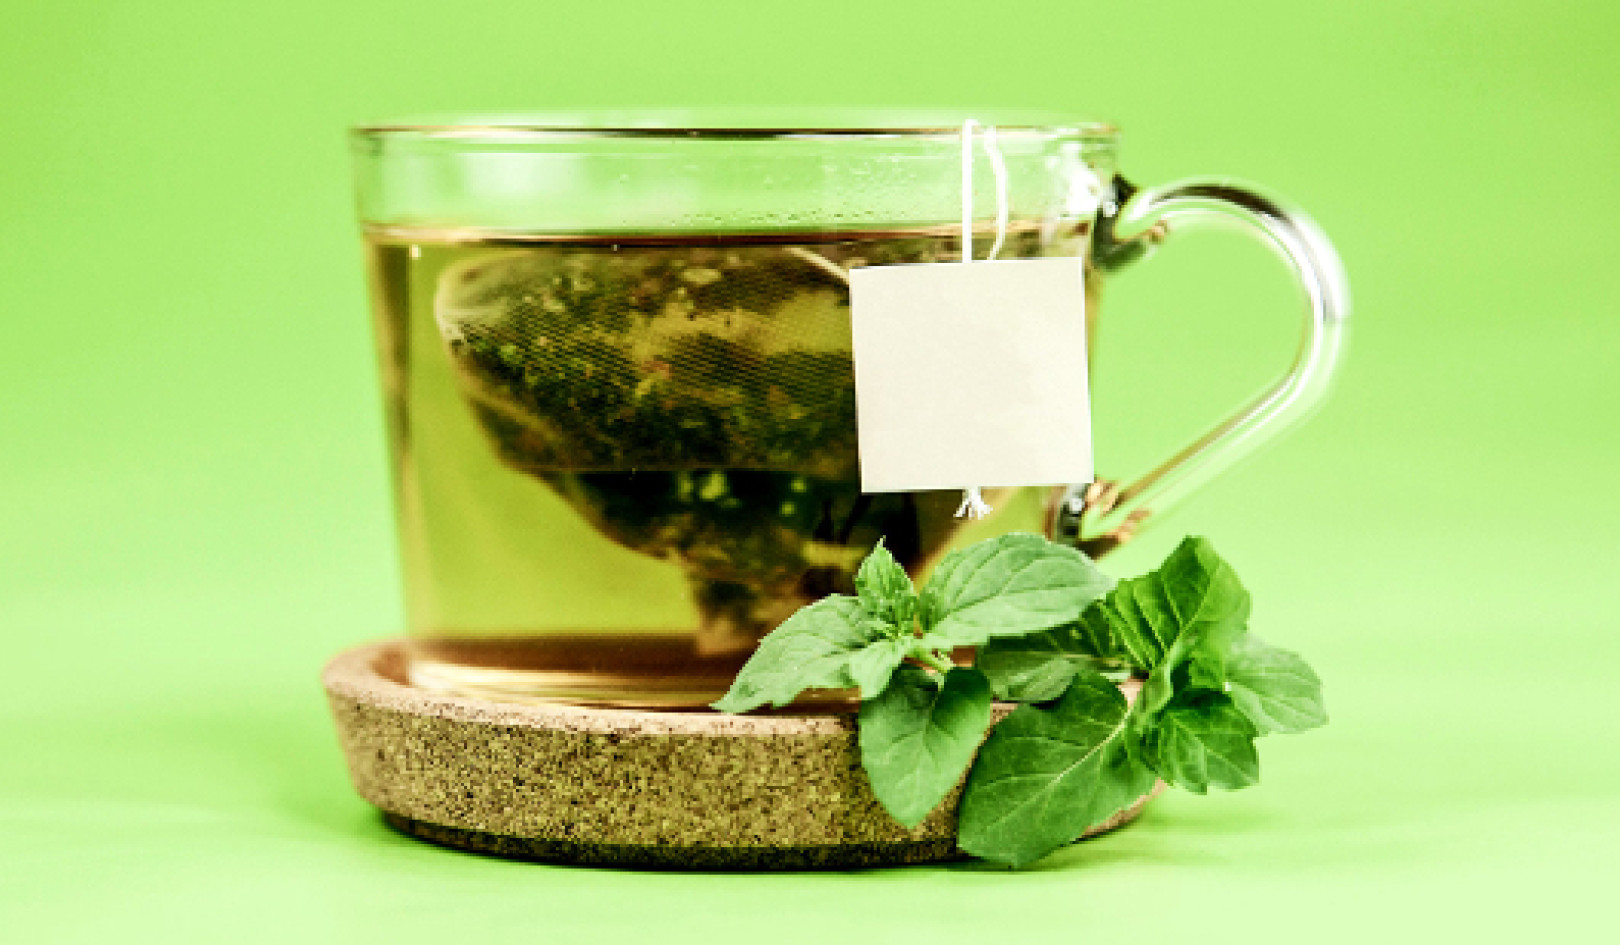 Compounds In Wine and Green Tea Can Slow Alzheimer’s?